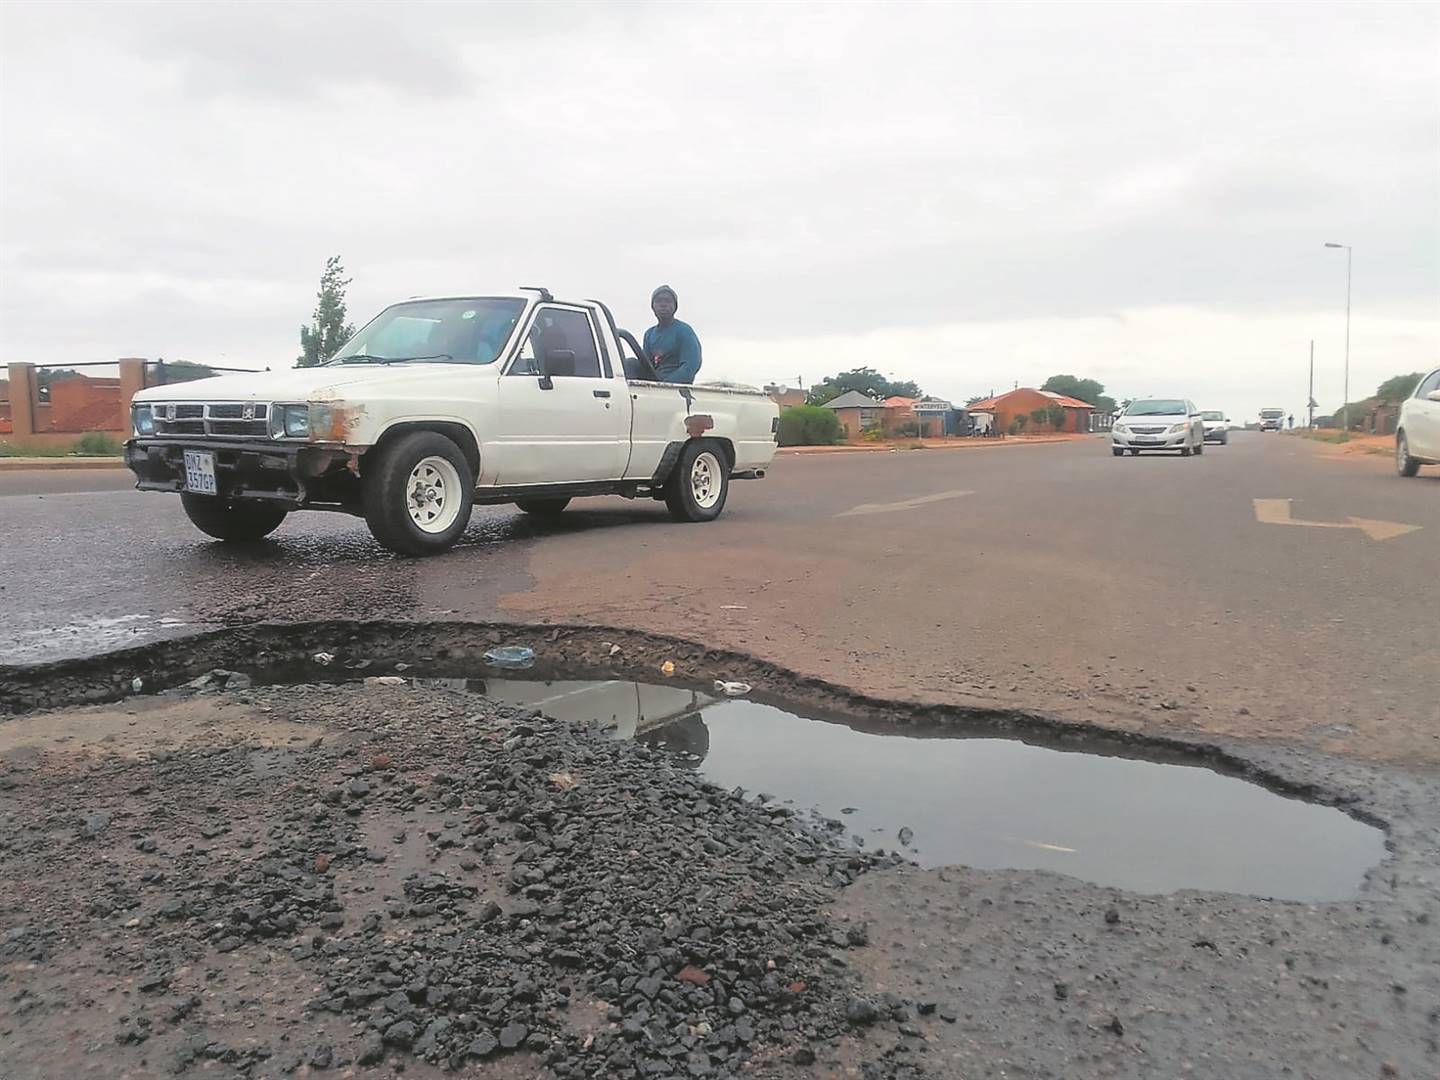 Resident, Sakkie Maseko (37), from Winterveldt in Tshwane with other residents are complaining about a giant pothole in the middle of Molefe Makinta Highway in Winterveldt, residents are even calling it a swimming pool in the middle of the road. Photo by Raymond MorarePhoto by 